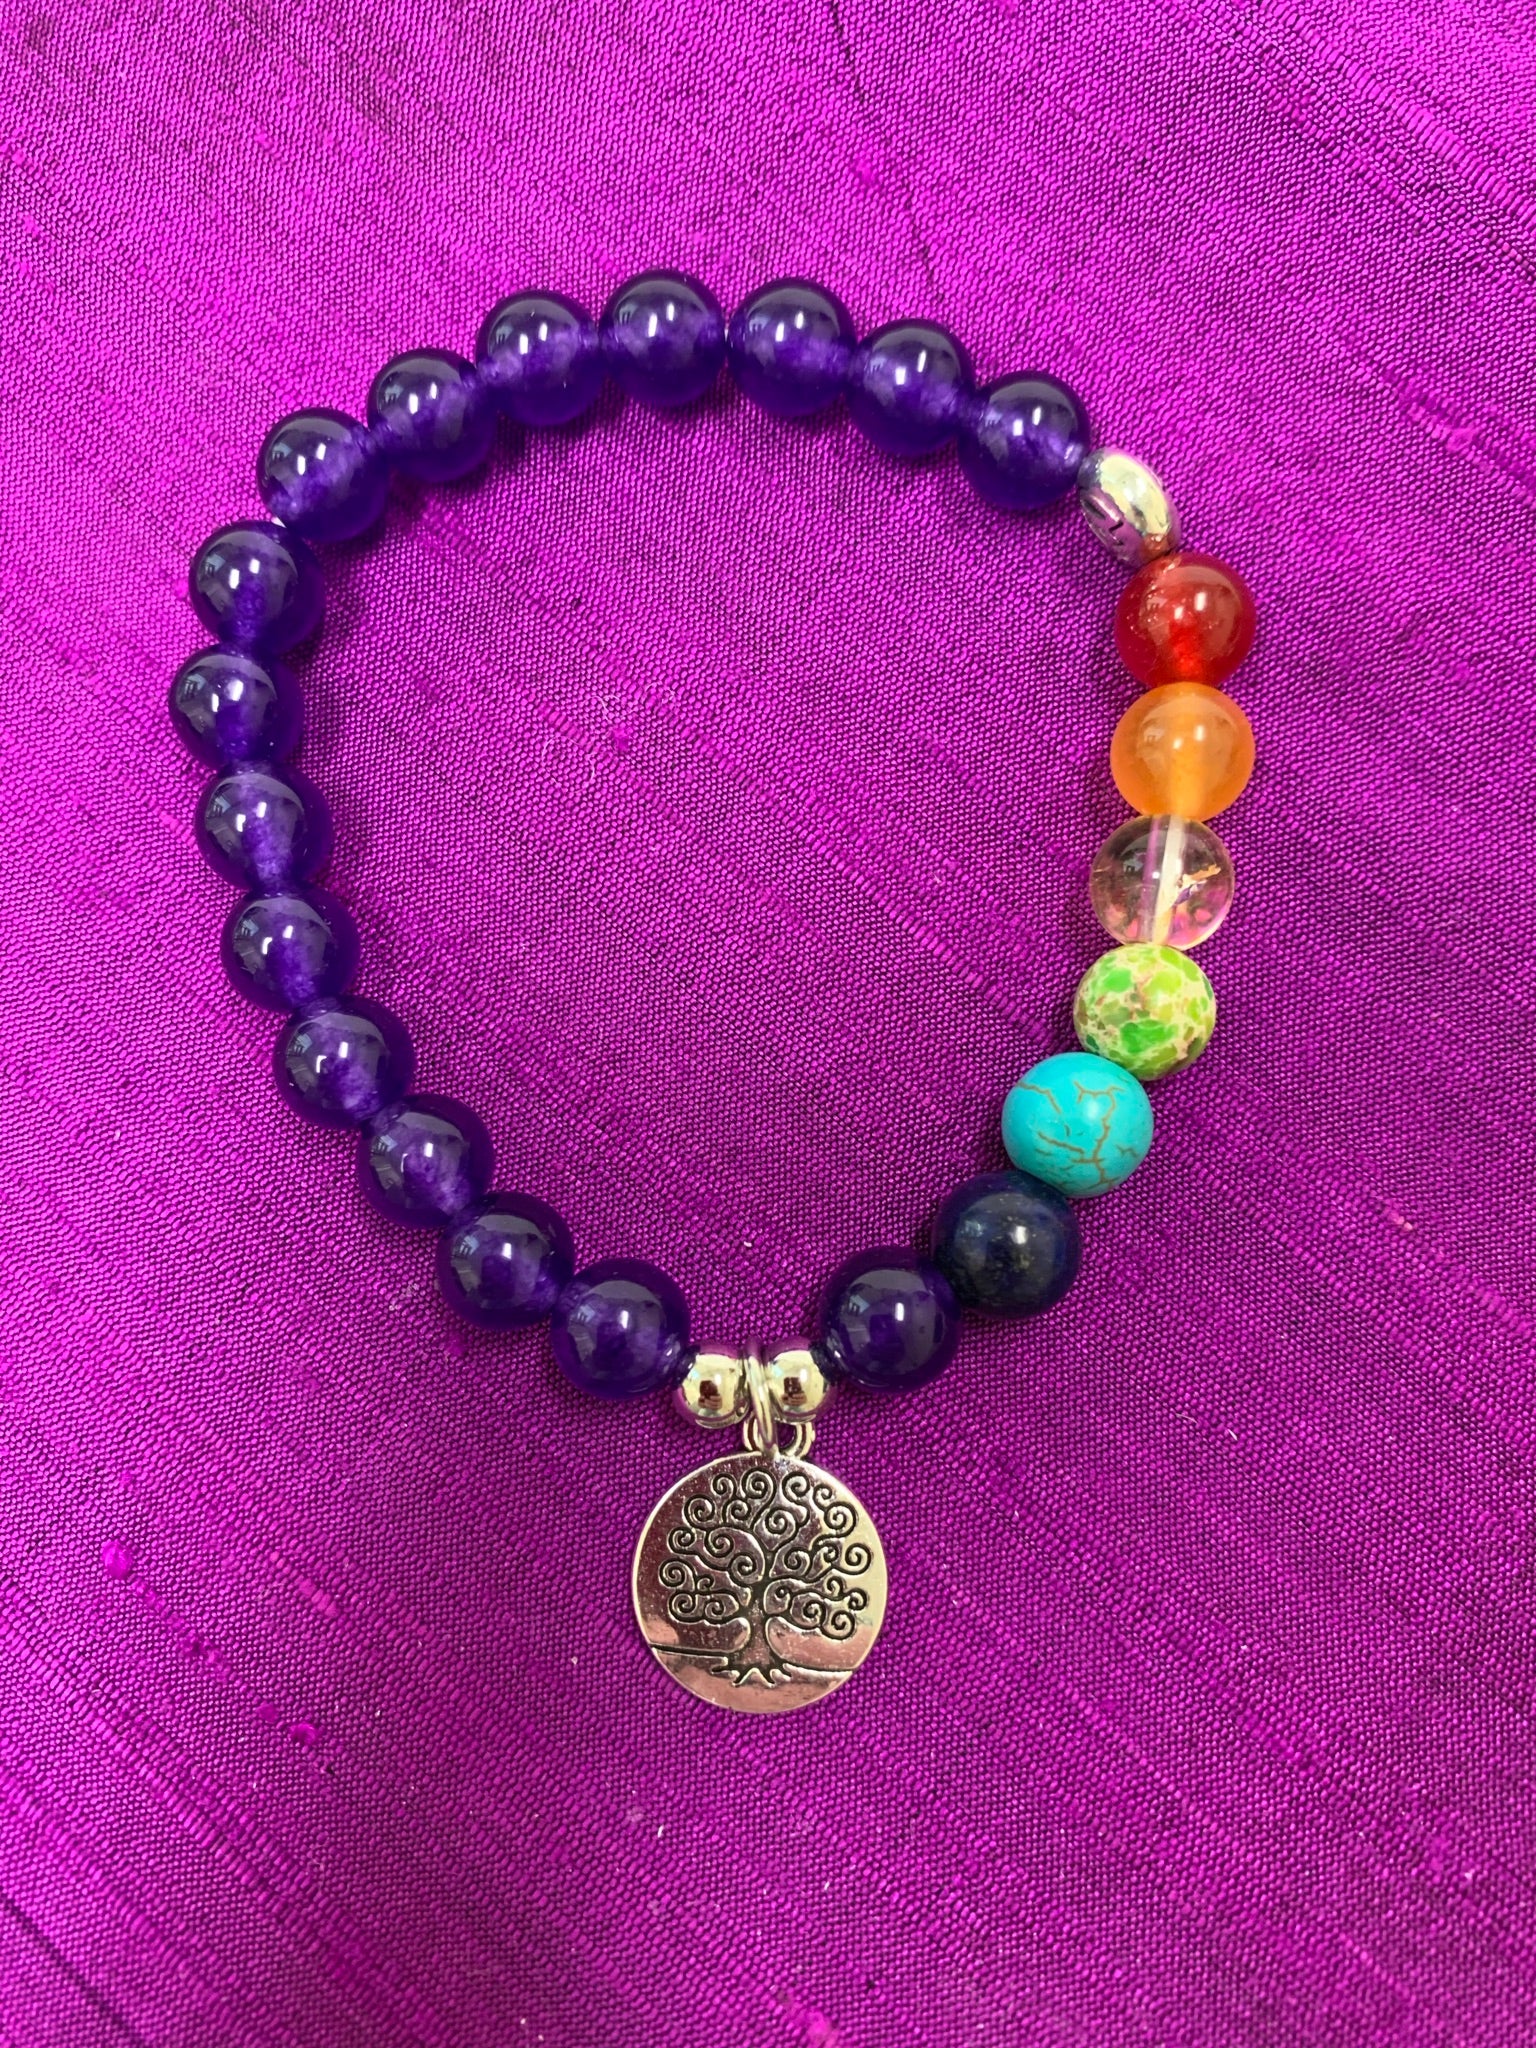 Second close-up of the power bracelet with all amethyst beads except 7 beads to match the chakras. Beads are 8mm. This bracelet also comes with a silver charm that has a tree of life etched in it in black. The beads are genuine but the color has been enhanced. 